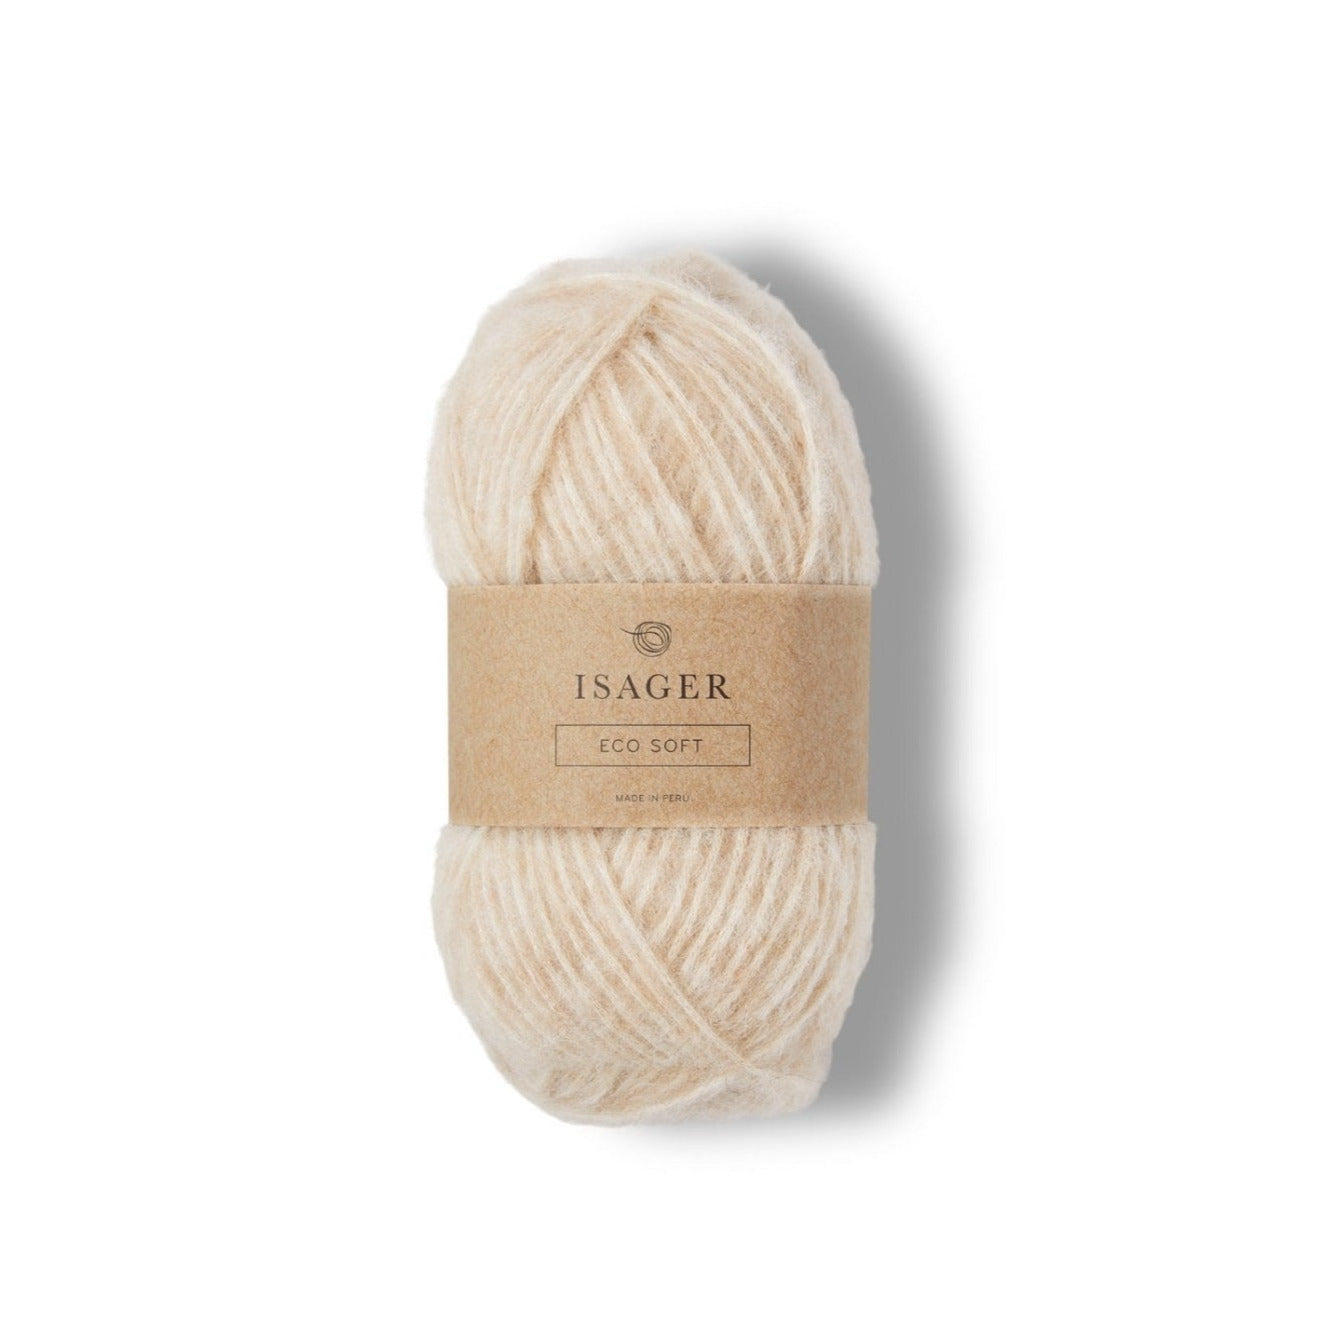 Isager Eco Soft - E6s - 8 Ply - Alpaca - The Little Yarn Store